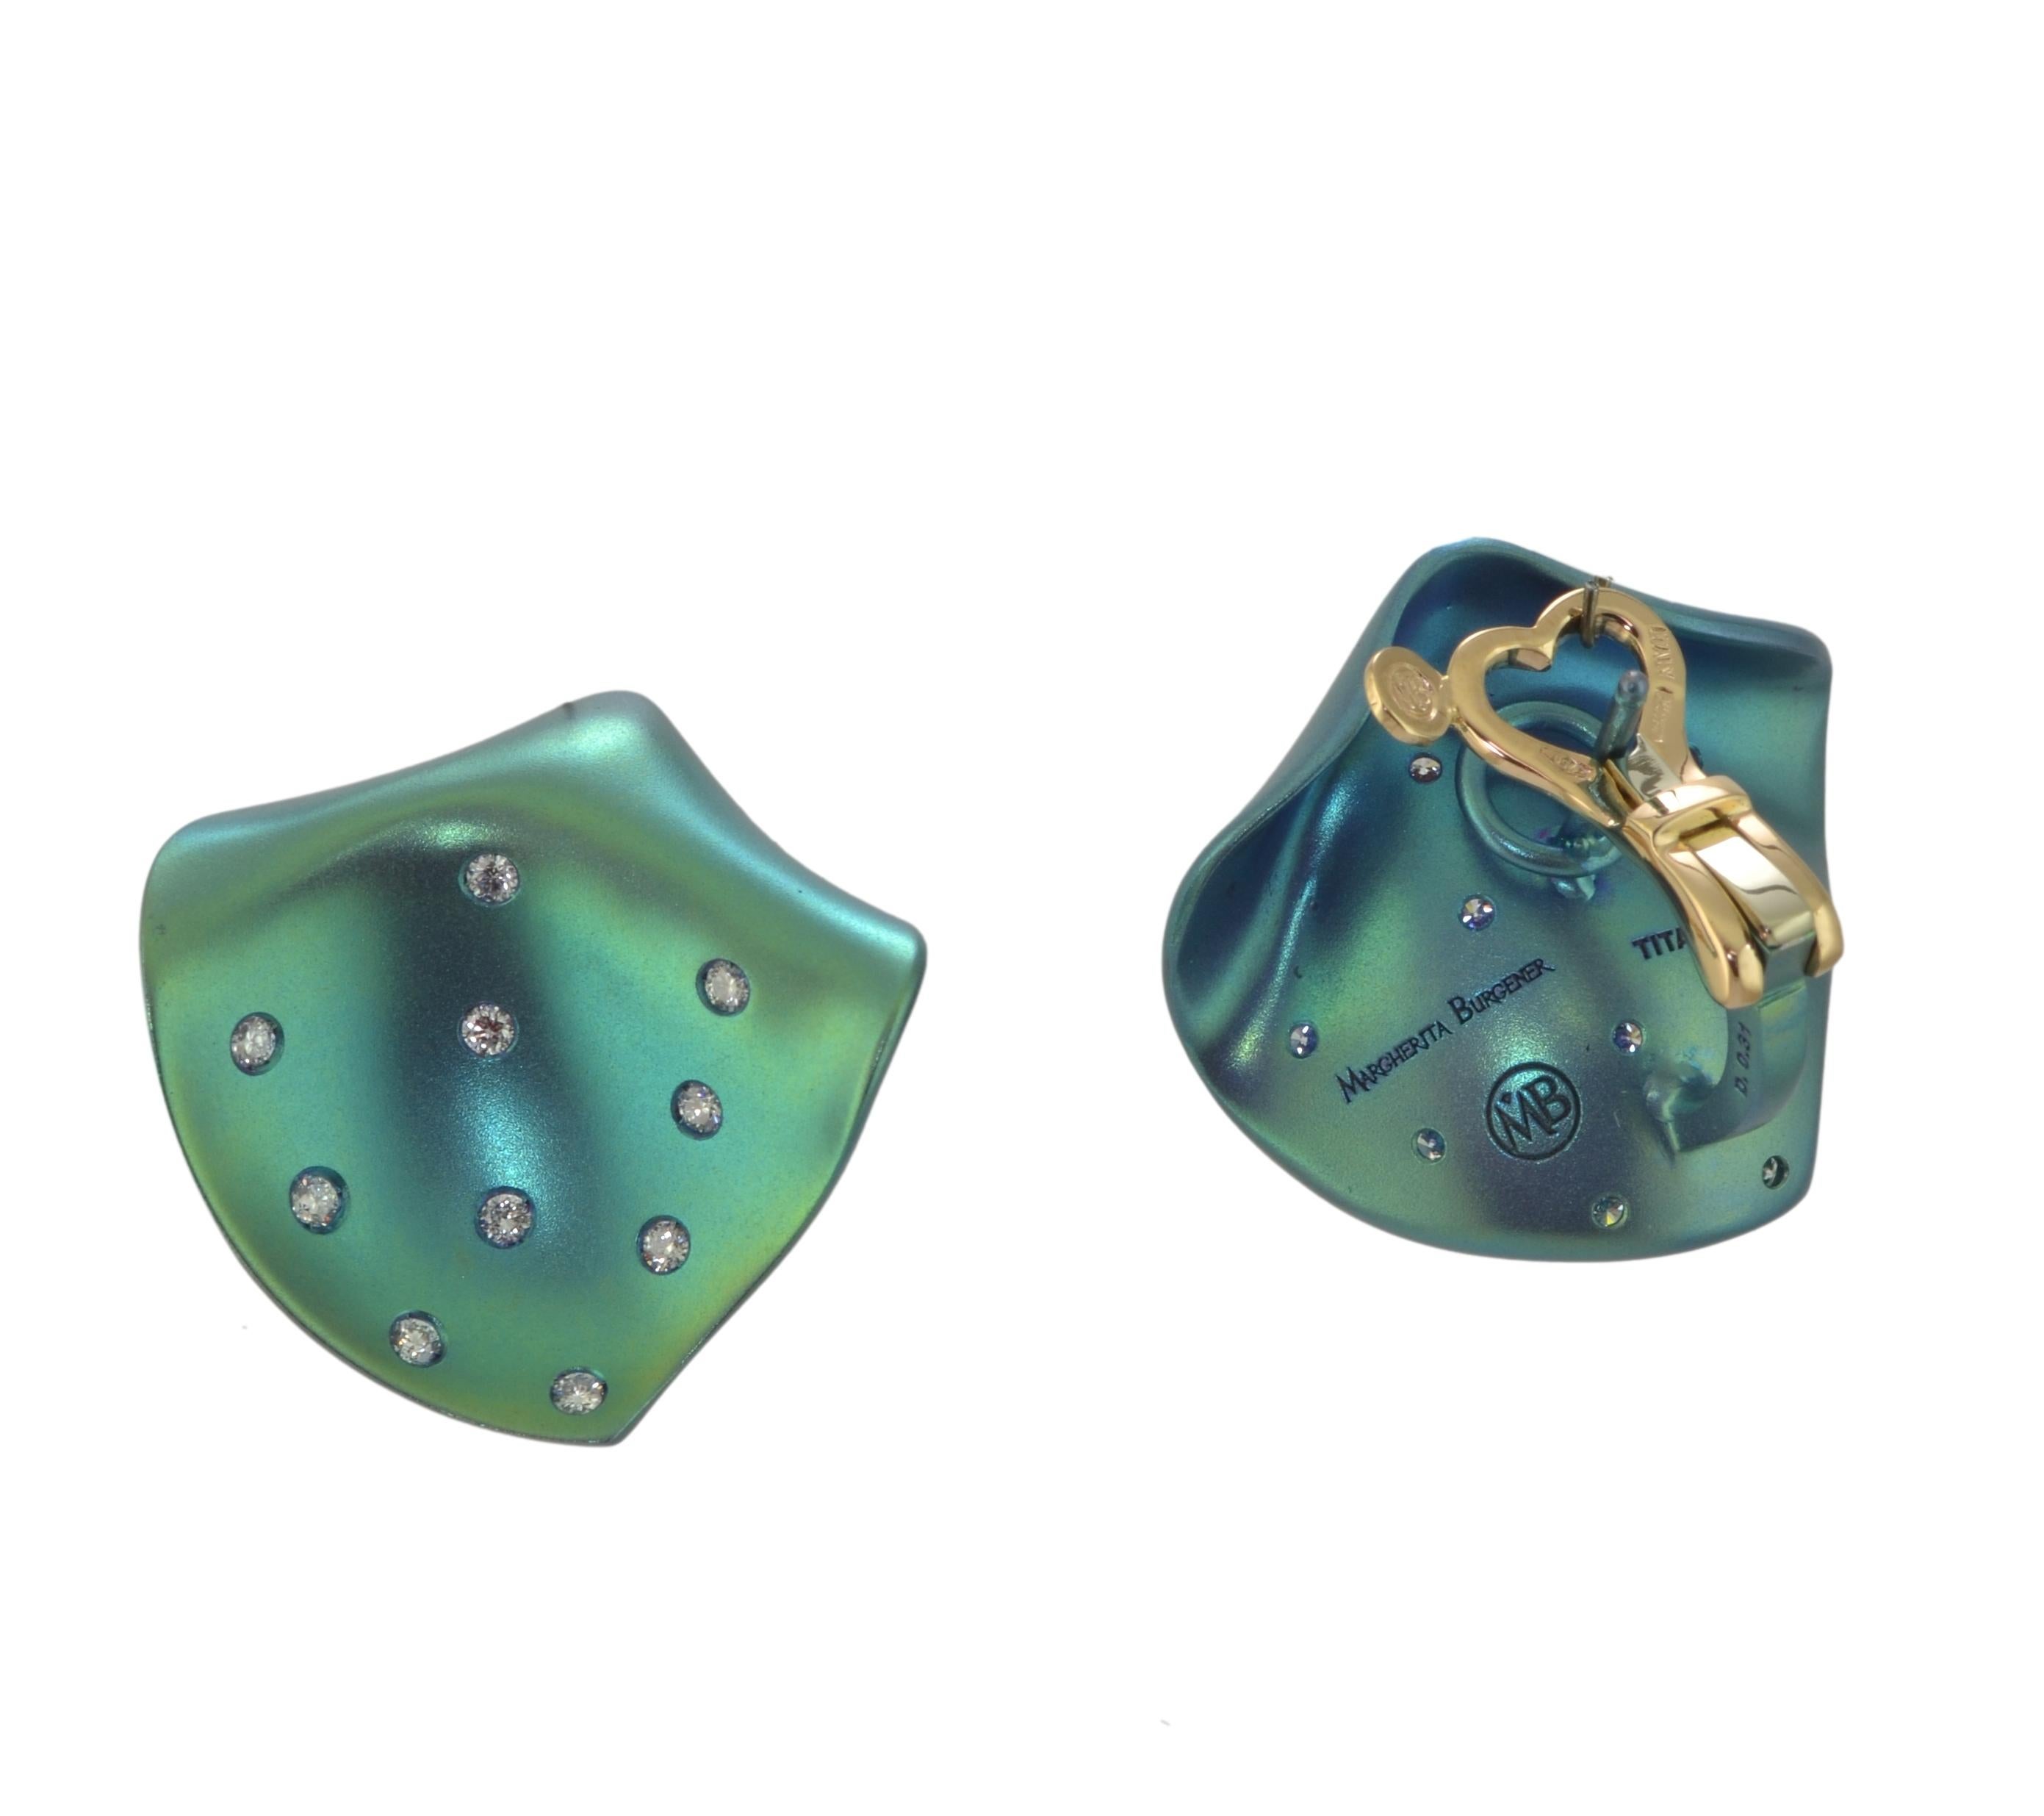 Extremely light, the Petal earrings are handcrafted in Margherita Burgener family workshop, based in Valenza, Italy.  Titanium is handworked and green color is obtained by oxydation. Color is stable.
Every day chic pair of earclips, they are very